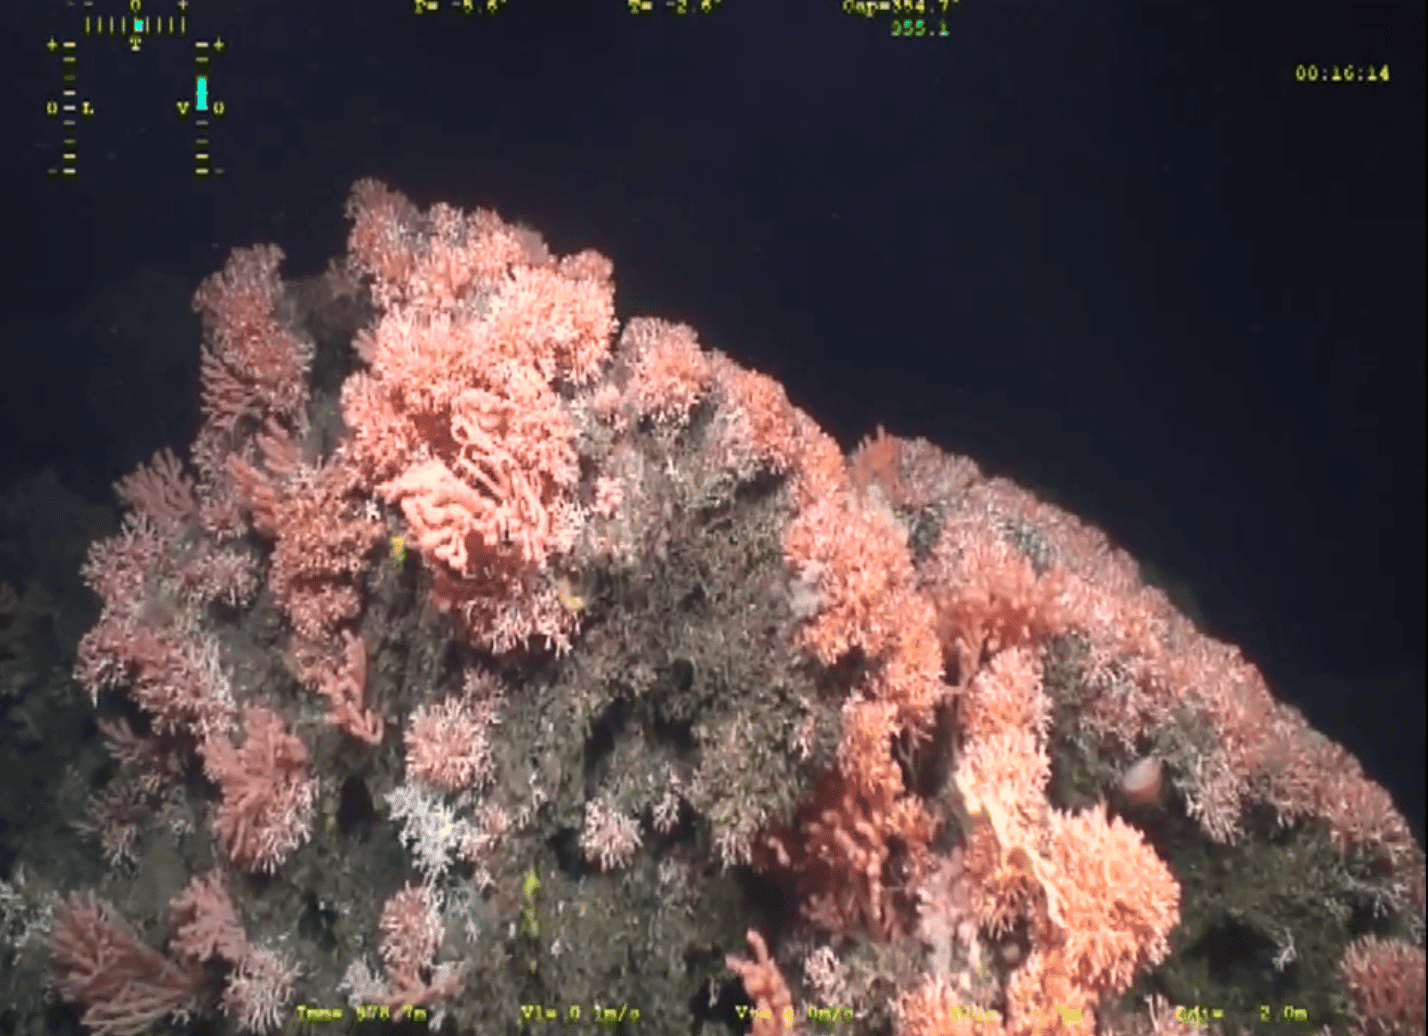 Extensive Coral Reefs Found Off Icelandic Coast